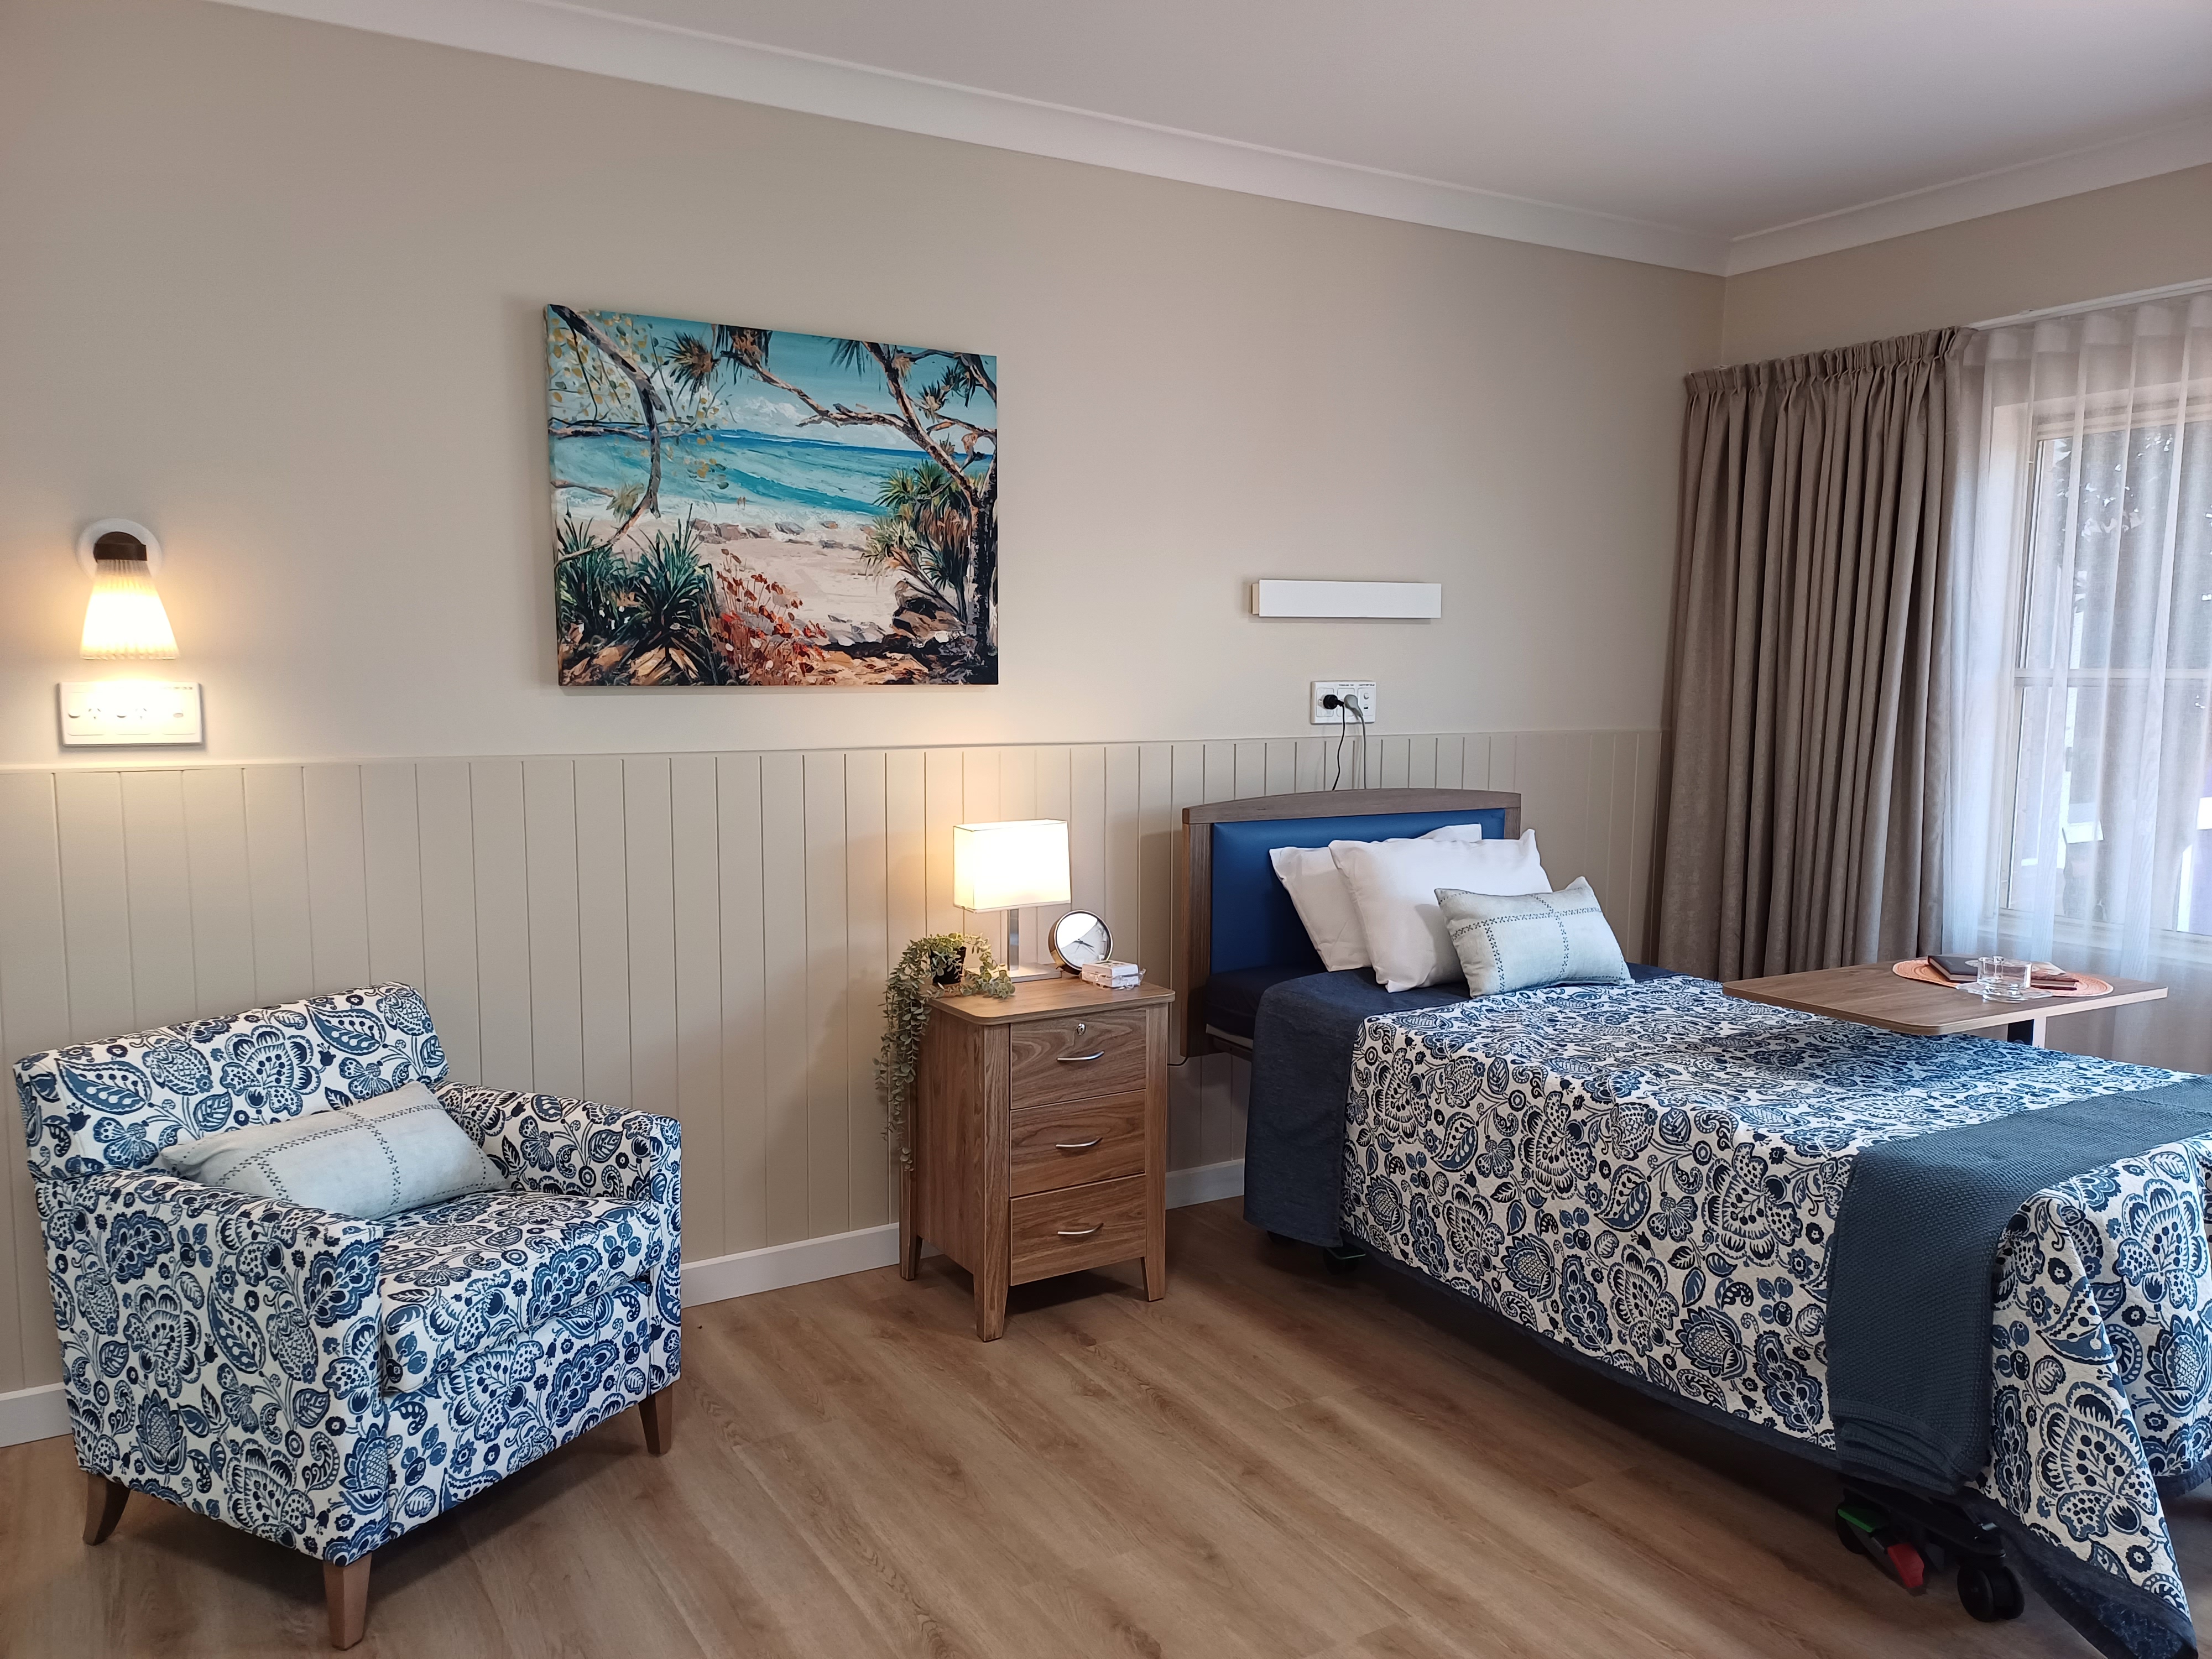 Woodport Aged Care Centre Introduces its Family Room